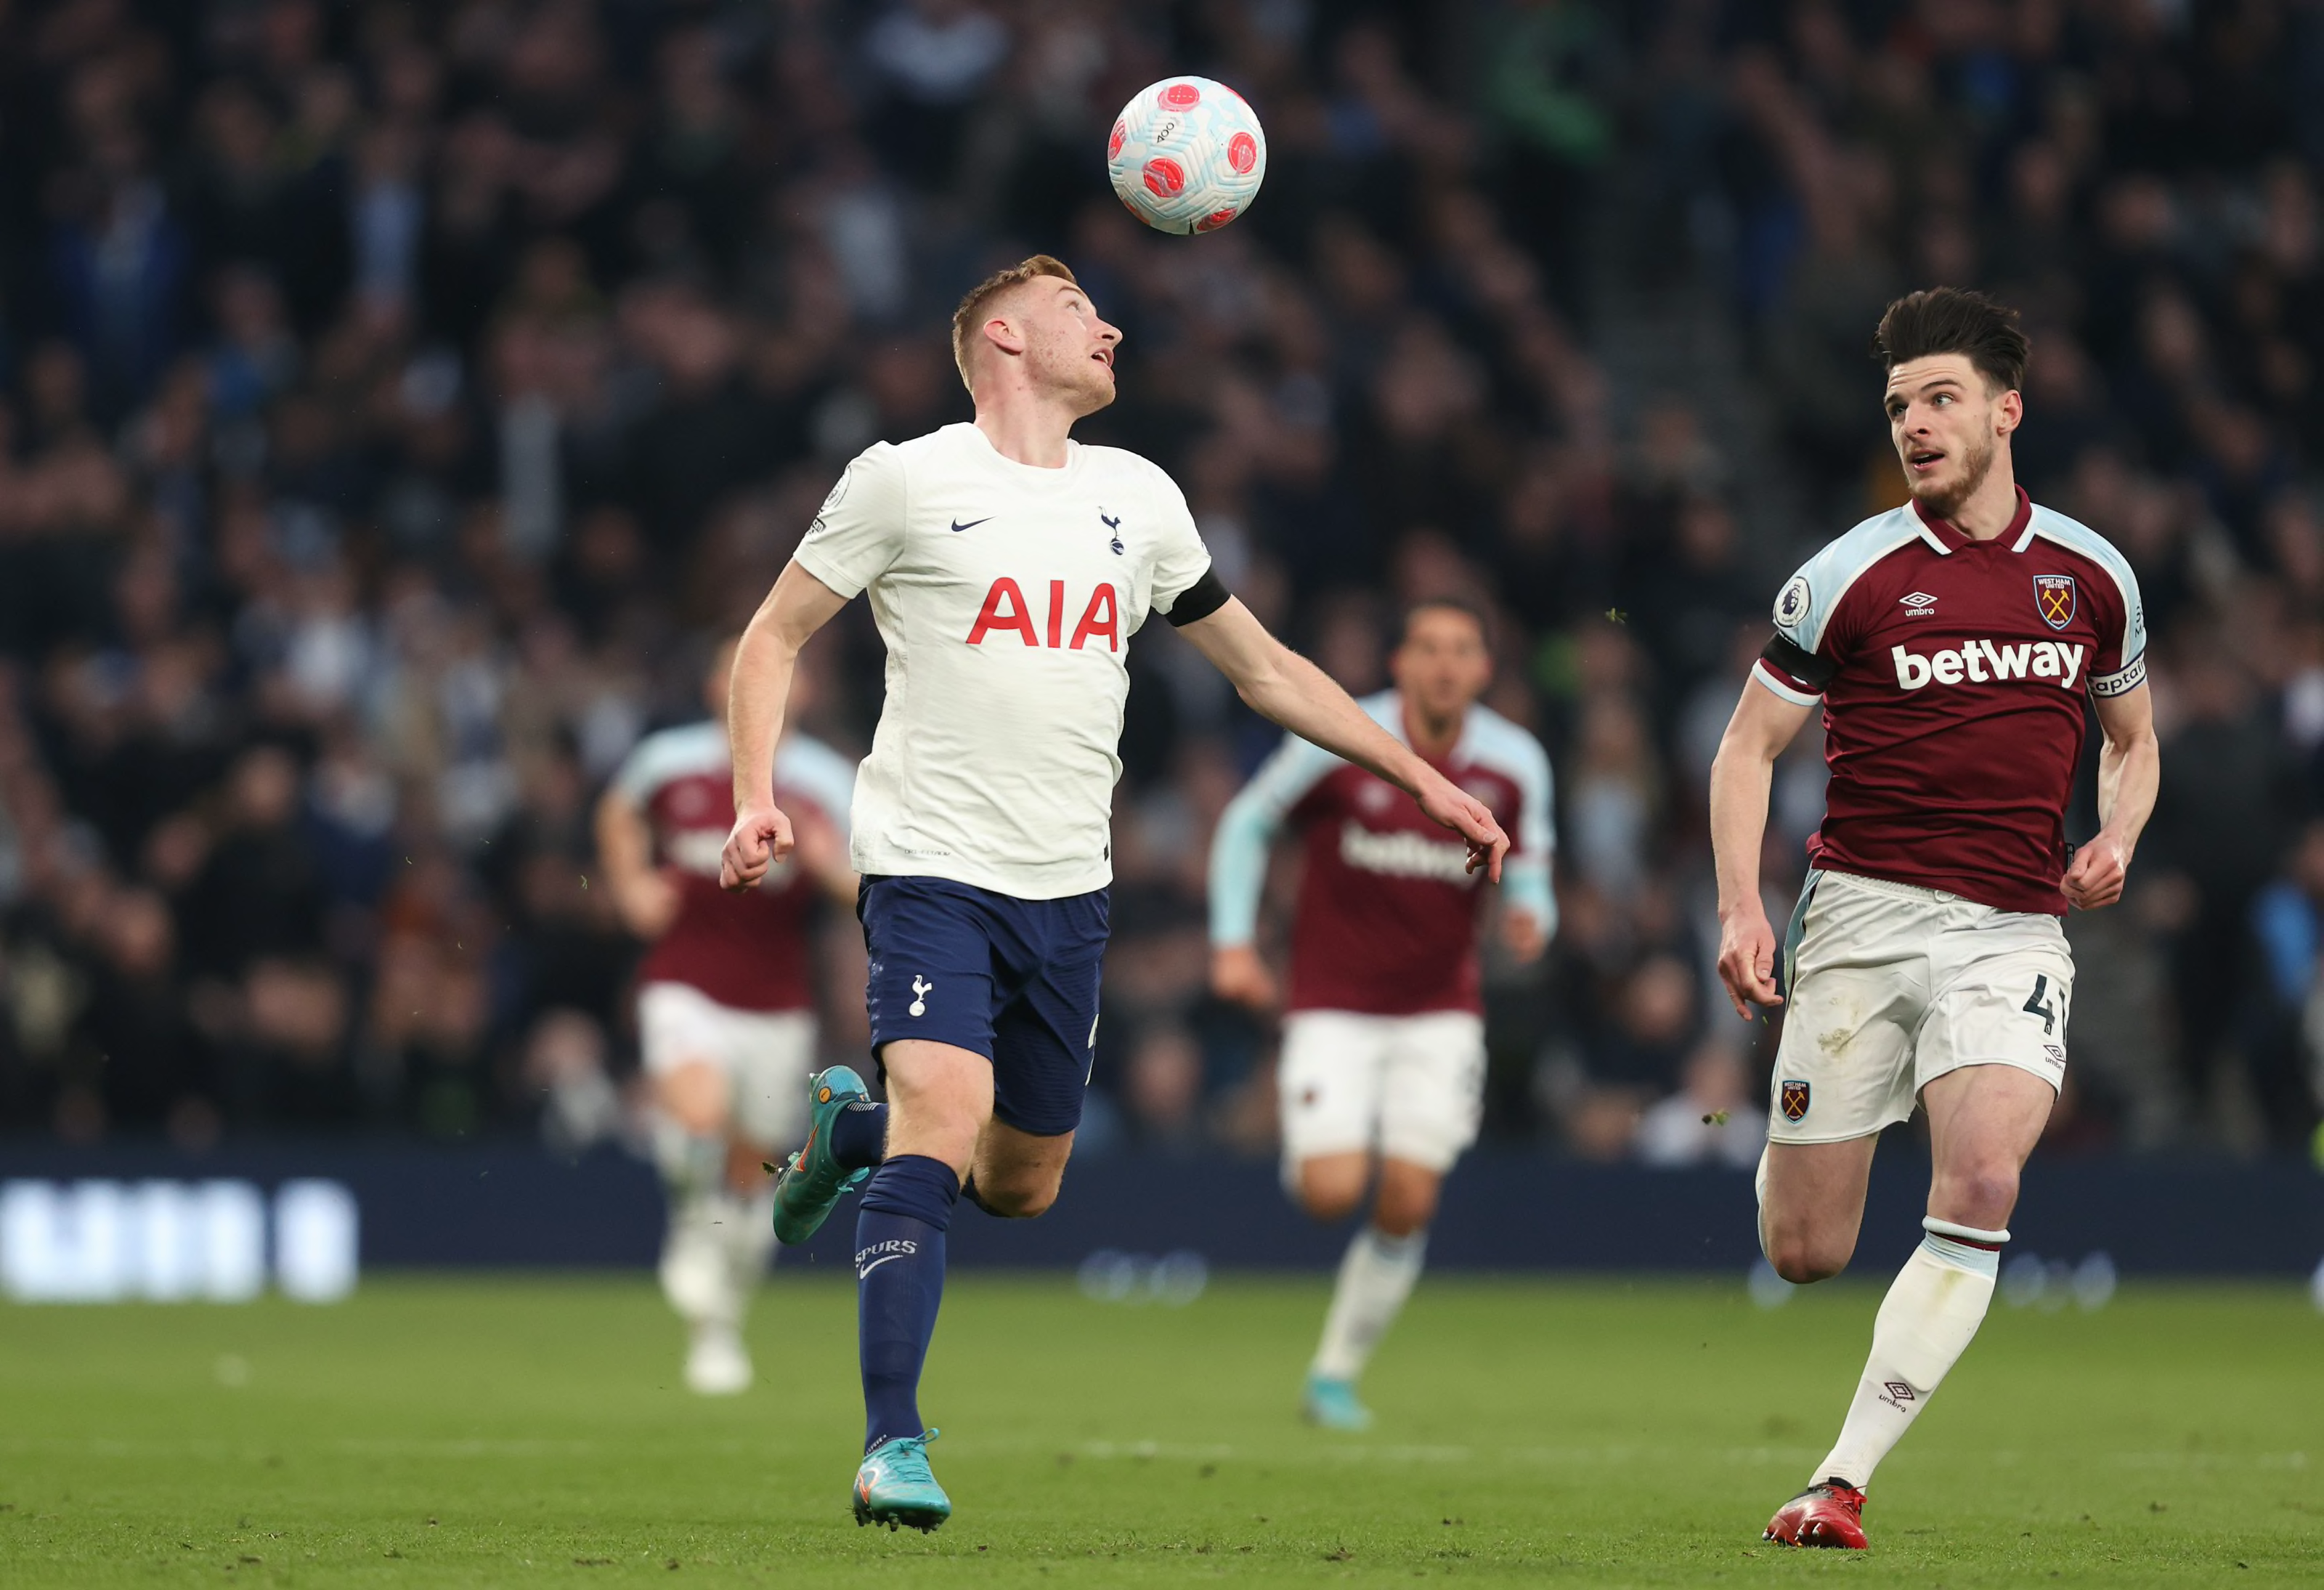 LONDON, ENGLAND - MARCH 20: Dejan Kulusevski of Tottenham Hotspur is challenged by Declan Rice of West Ham United during the Premier League match between Tottenham Hotspur and West Ham United at Tottenham Hotspur Stadium on March 20, 2022 in London, England. (Photo by Julian Finney/Getty Images)